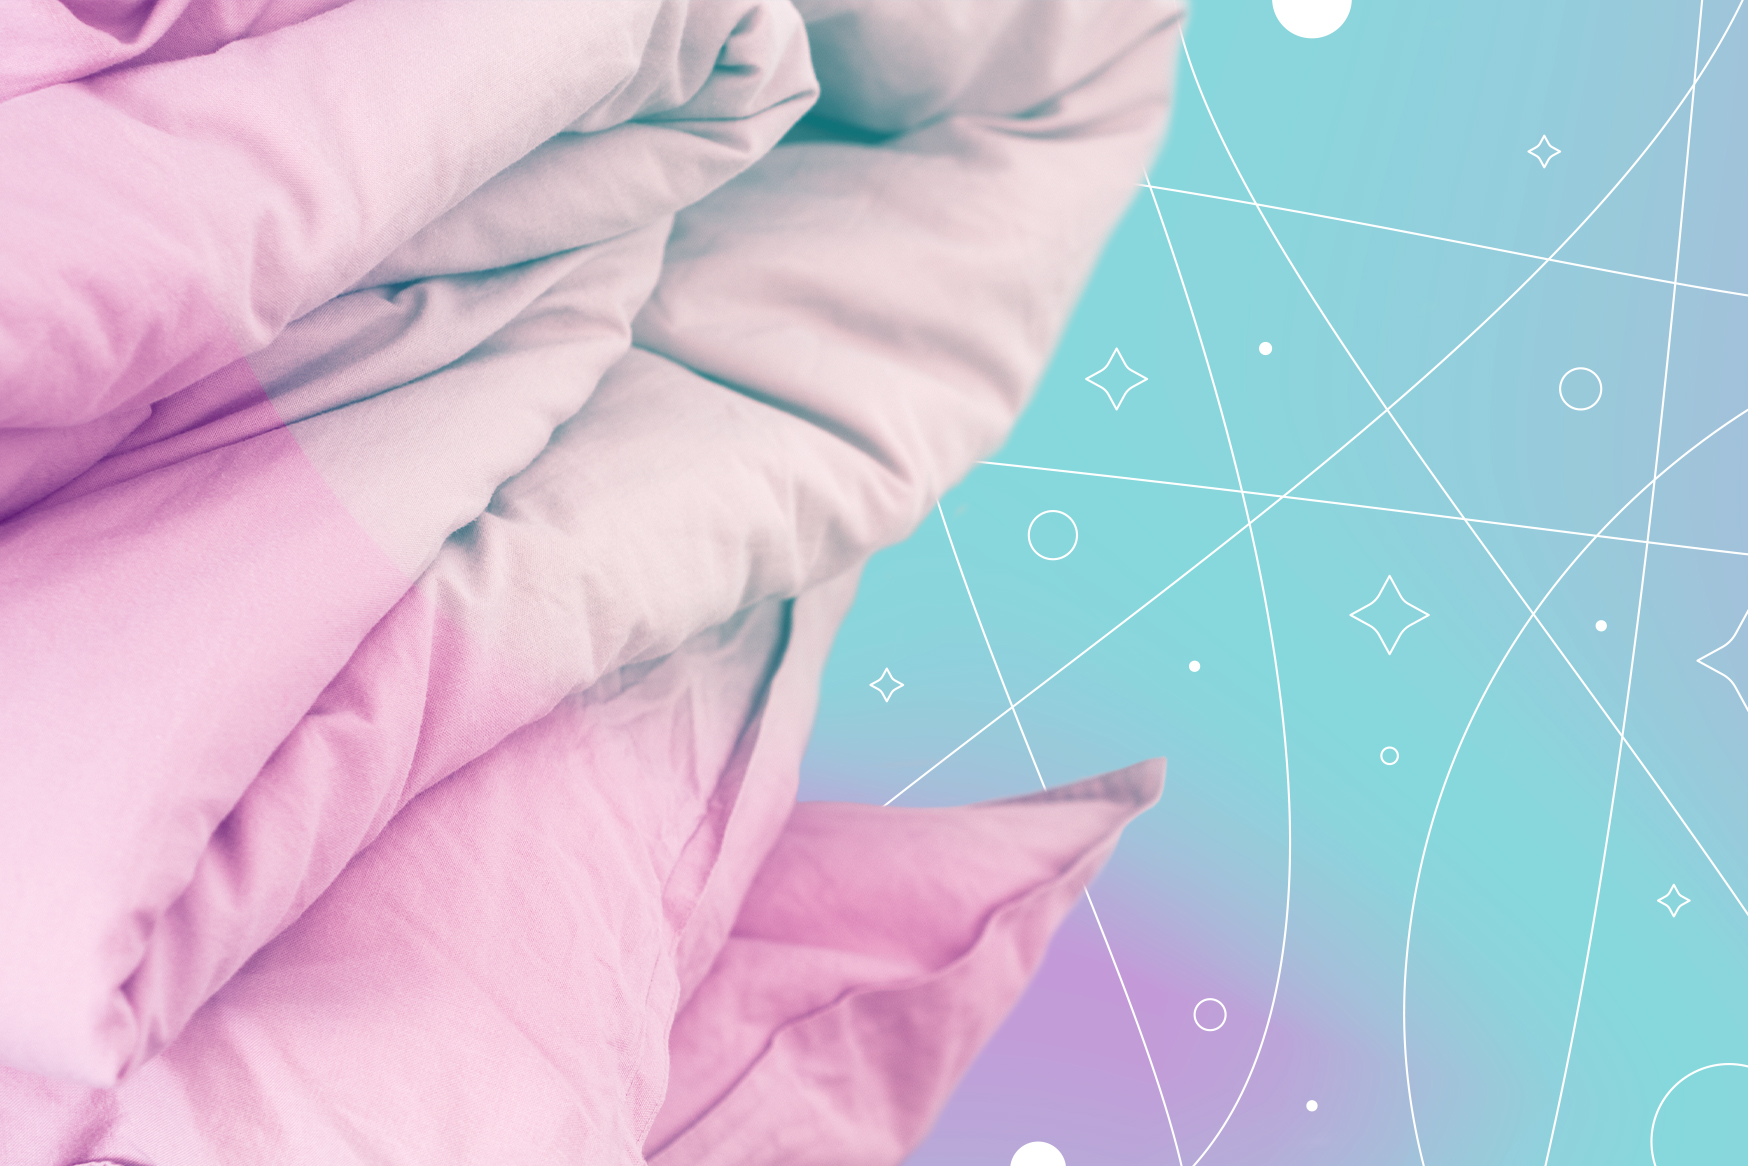 What the science actually says about weighted blankets